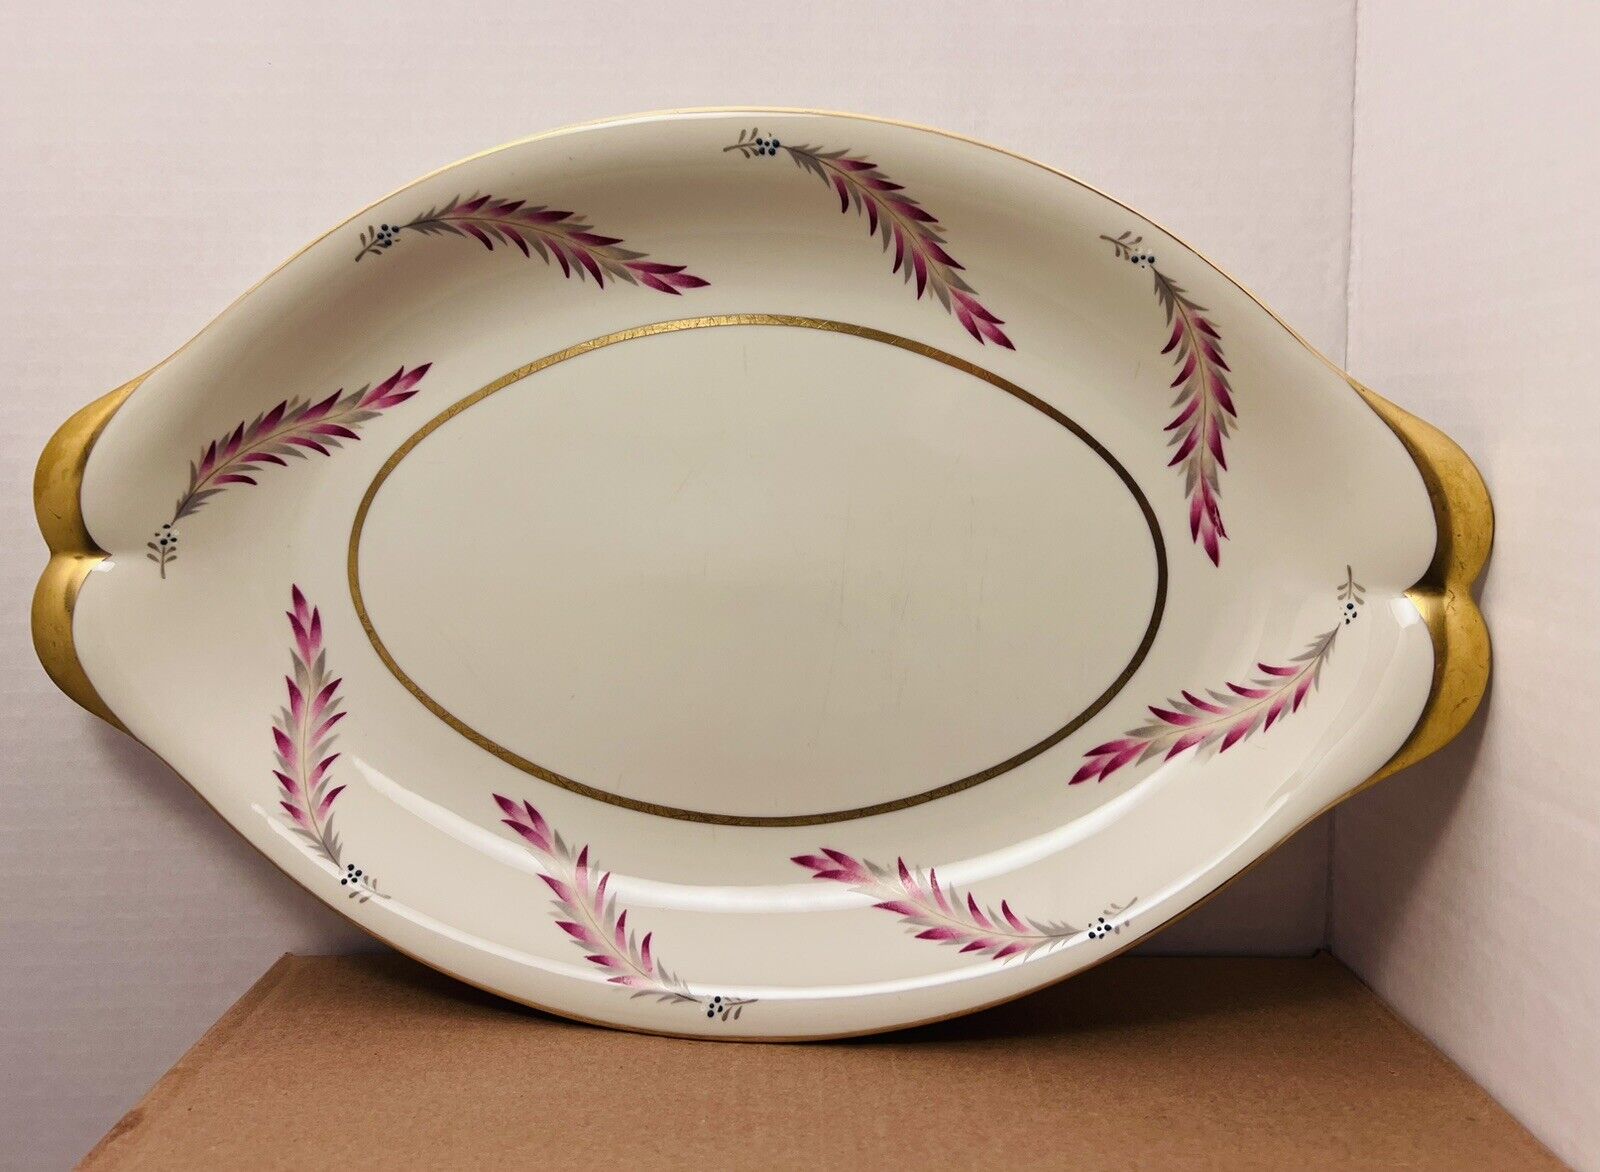 Meito Norleans Chatham China, Serving Platter, 18”x 11.5”.